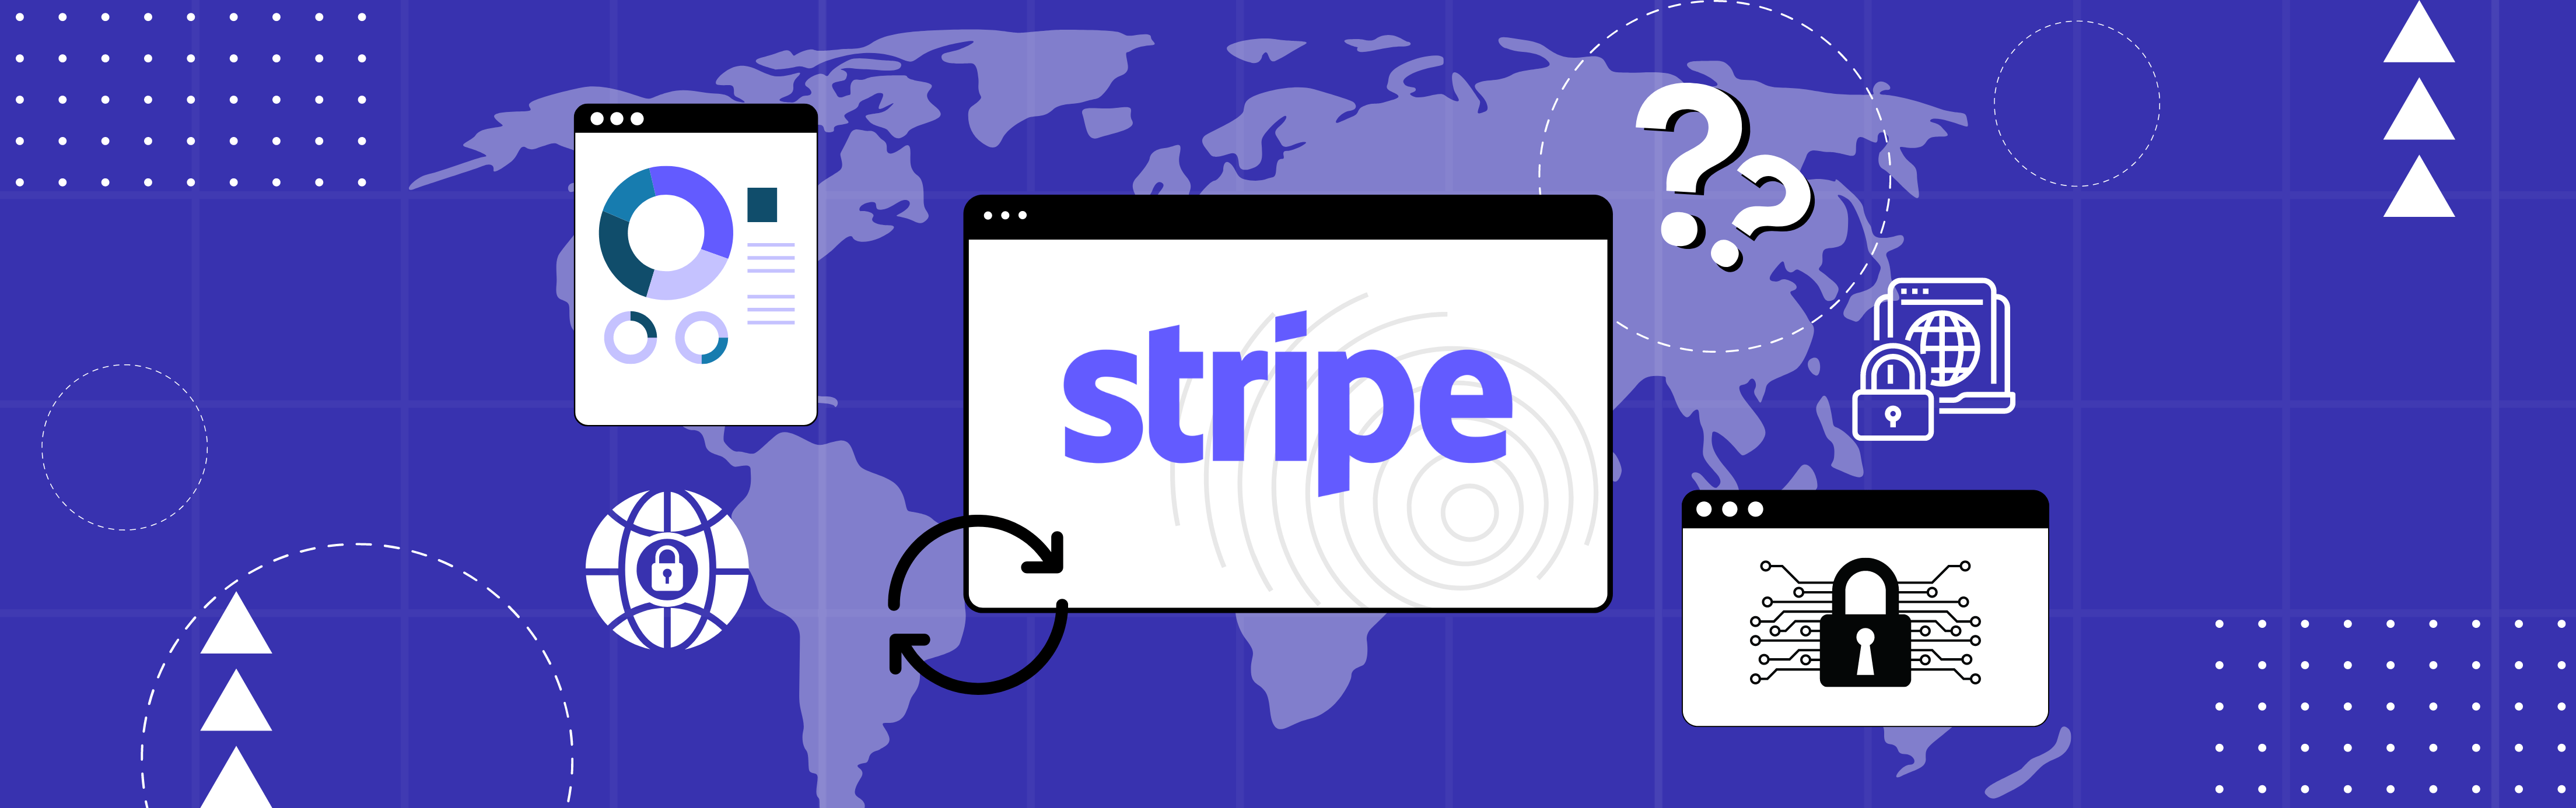 Is Stripe a Secure Payment Method?